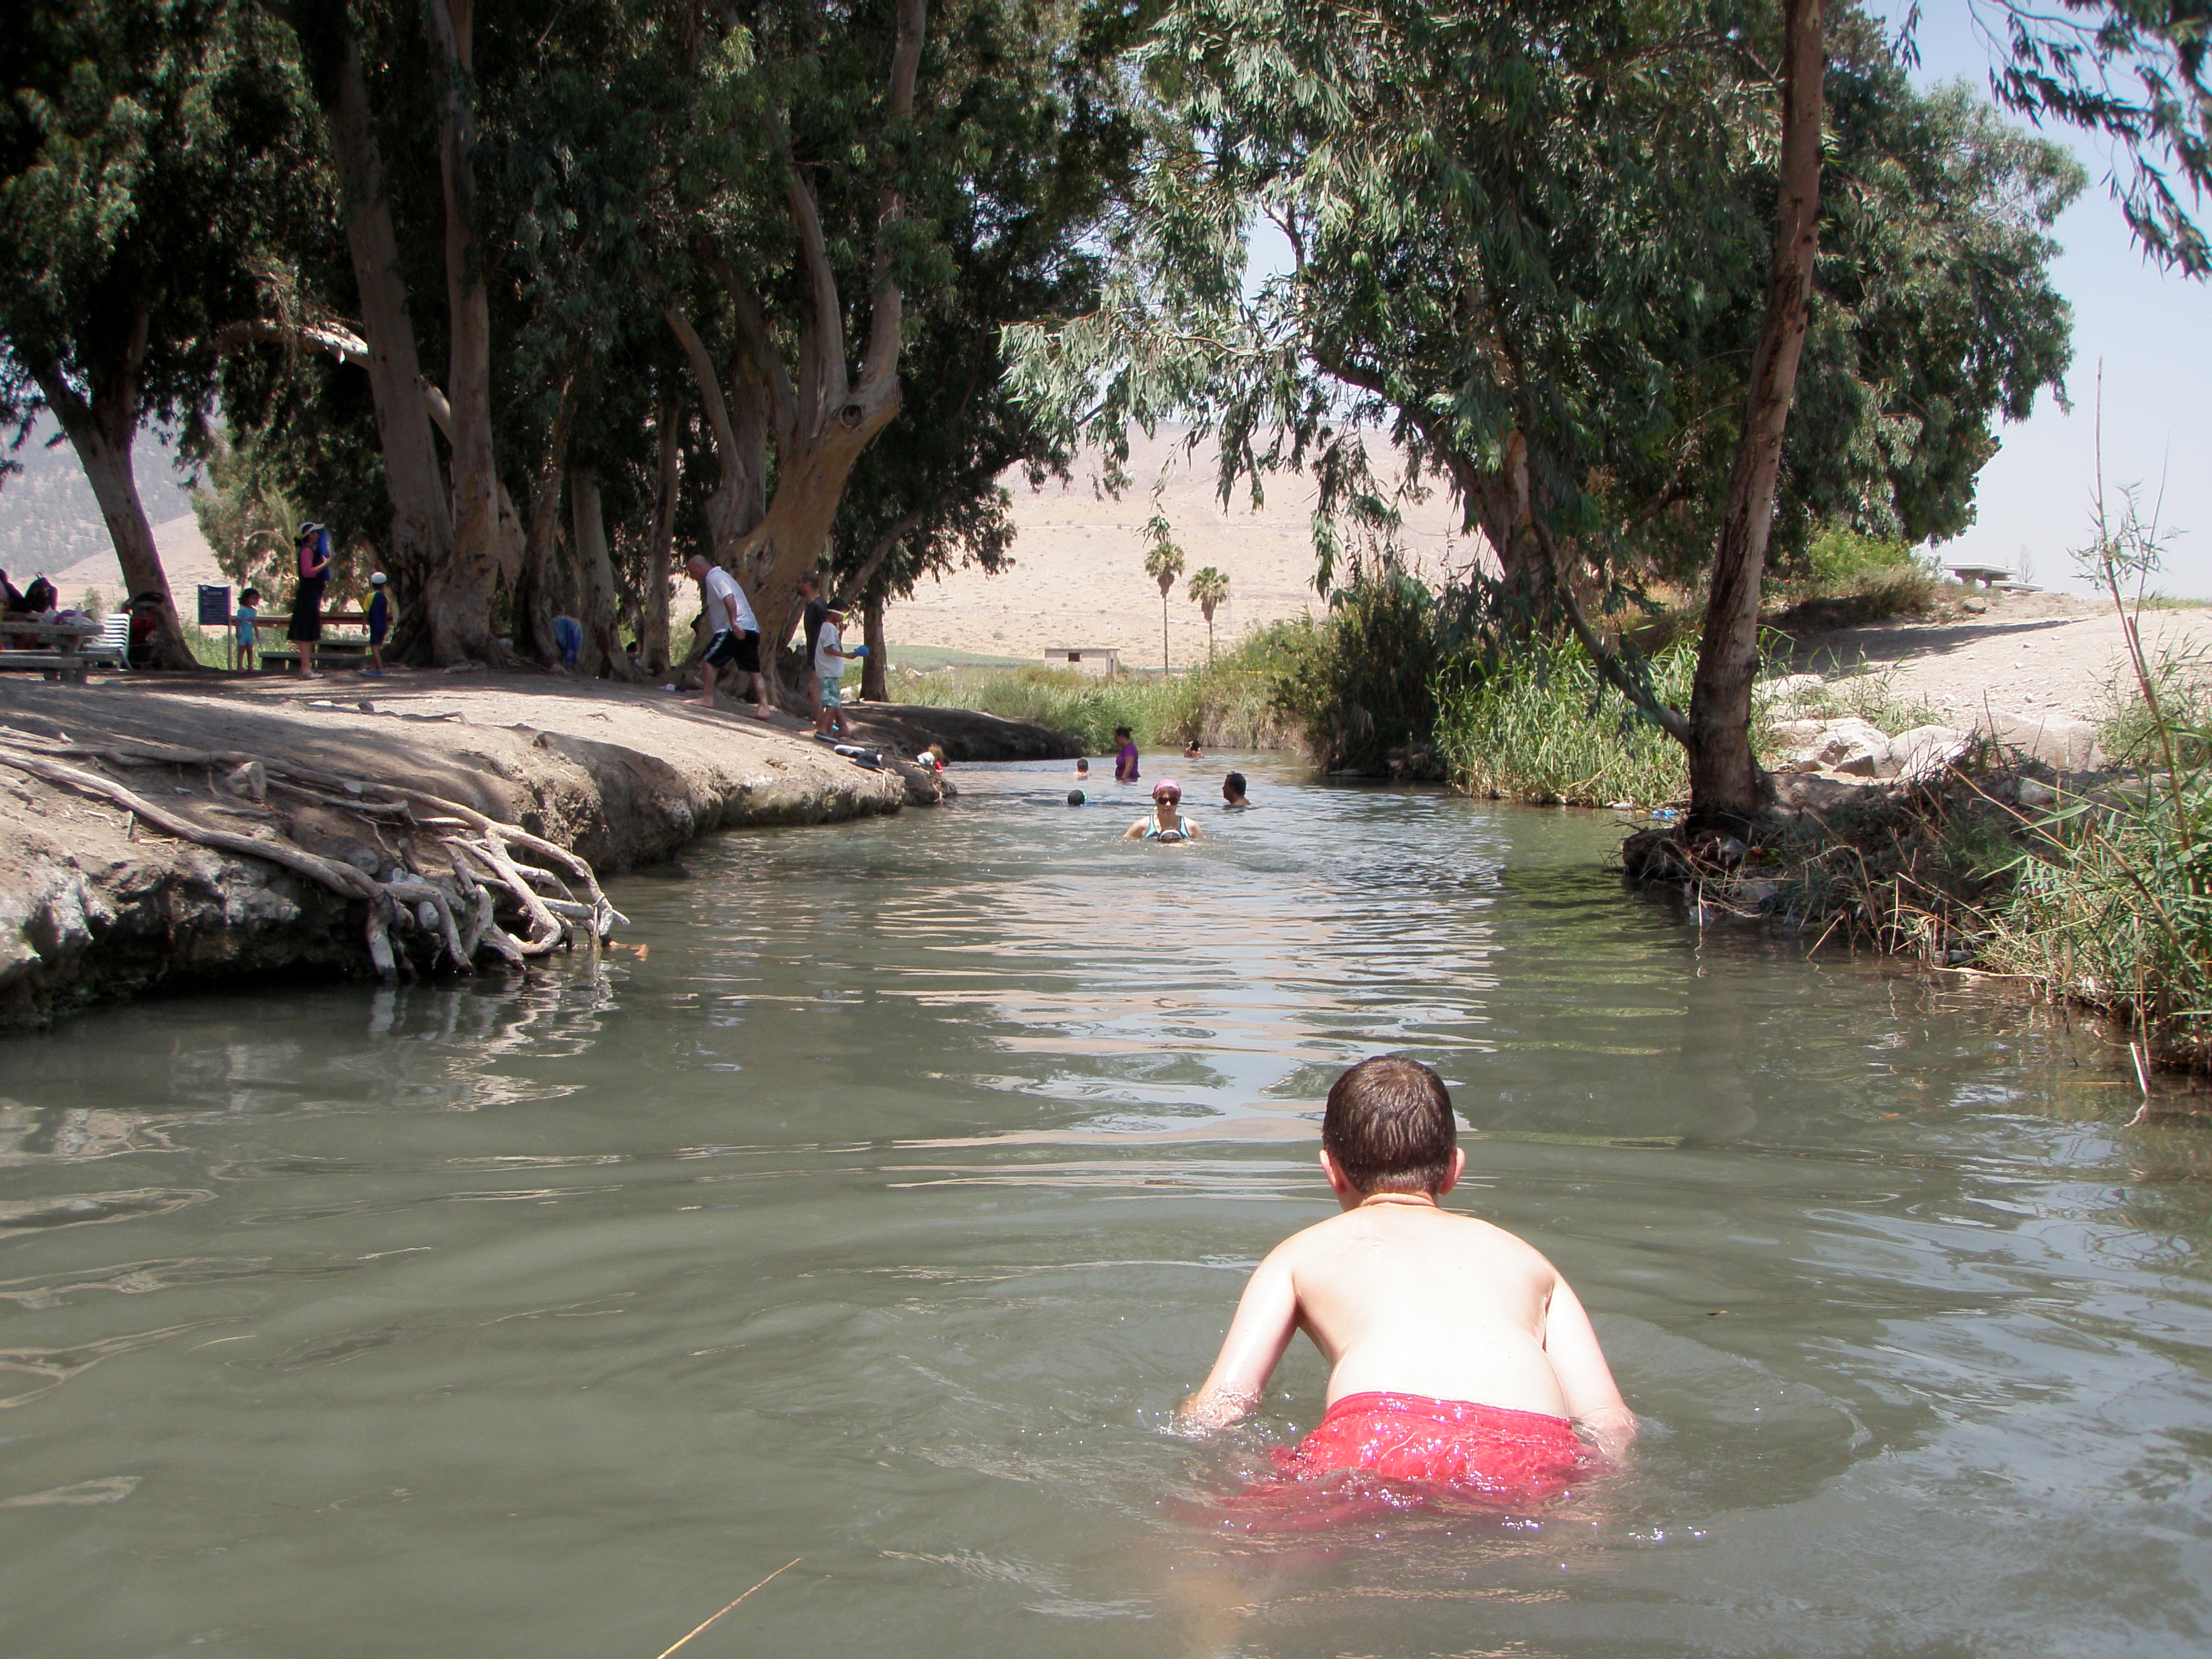 Galilee, Harod and Bet-Shean valley springs to the Jordan river Adventure 4x4 je